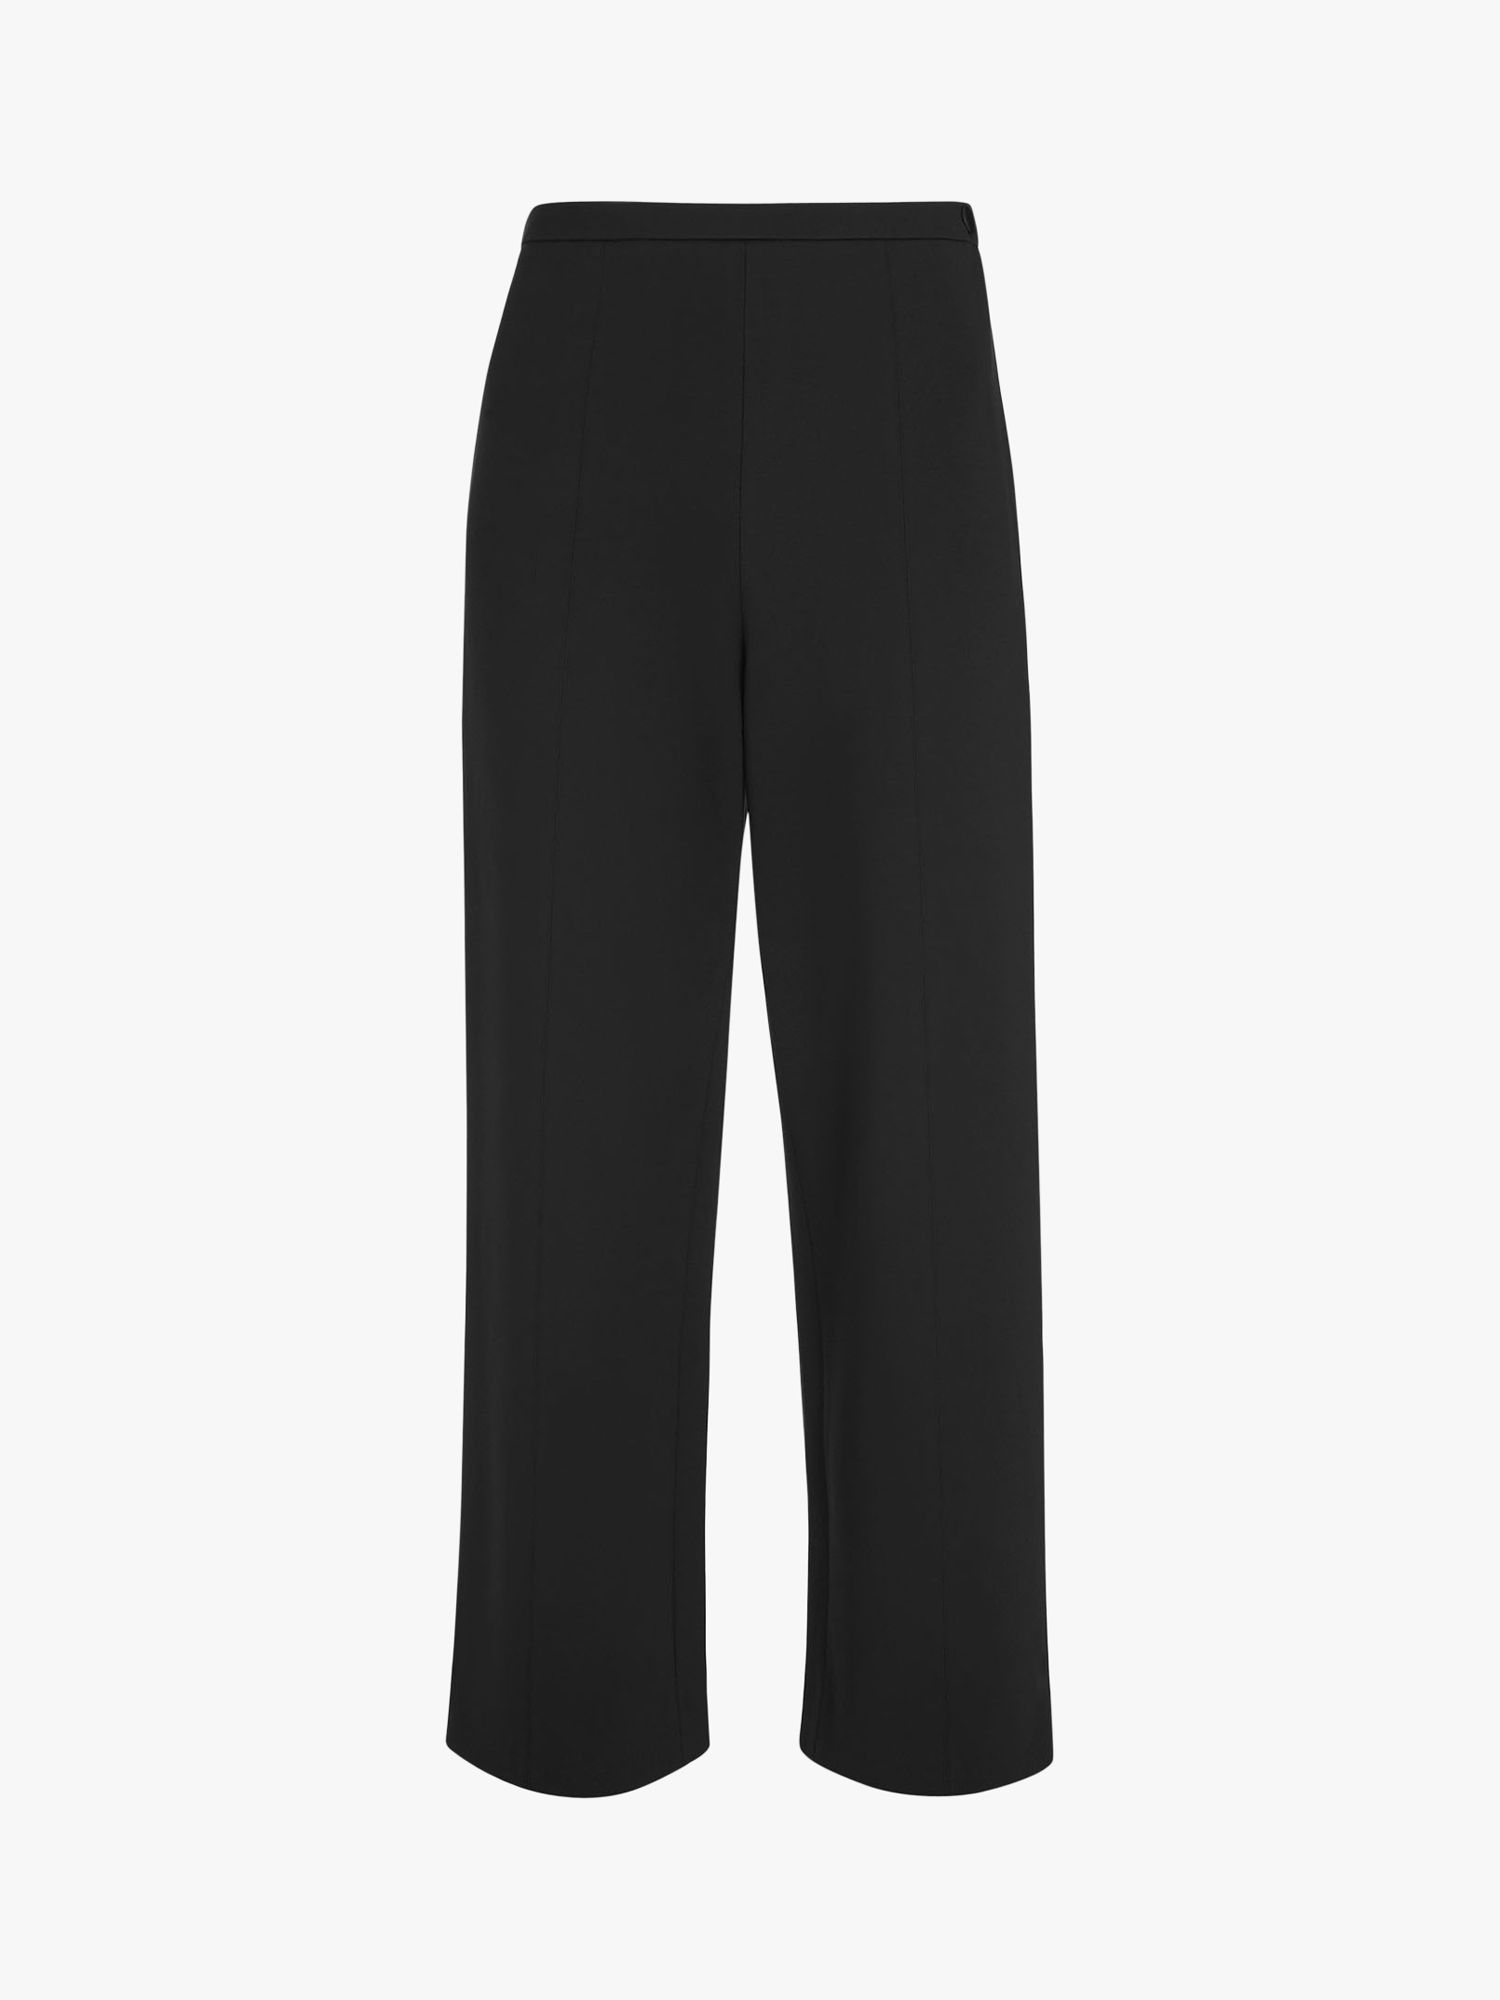 Whistles Camilla Wide Leg Trousers, Black at John Lewis & Partners